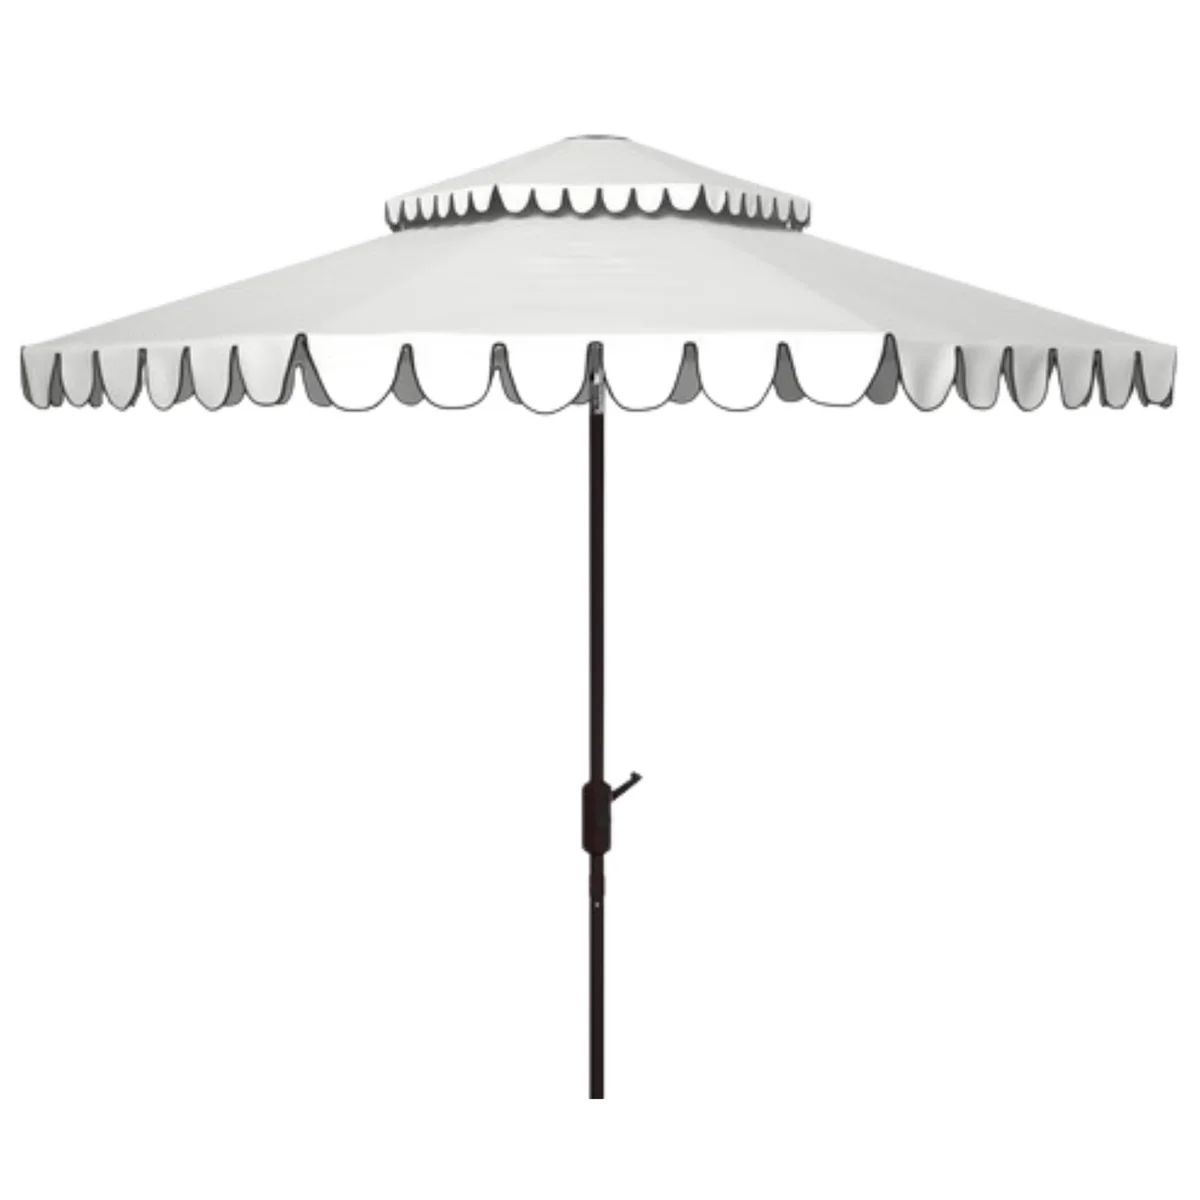 Resort Inspired 9 Foot Round Double Top Crank Umbrella in White | The Well Appointed House, LLC